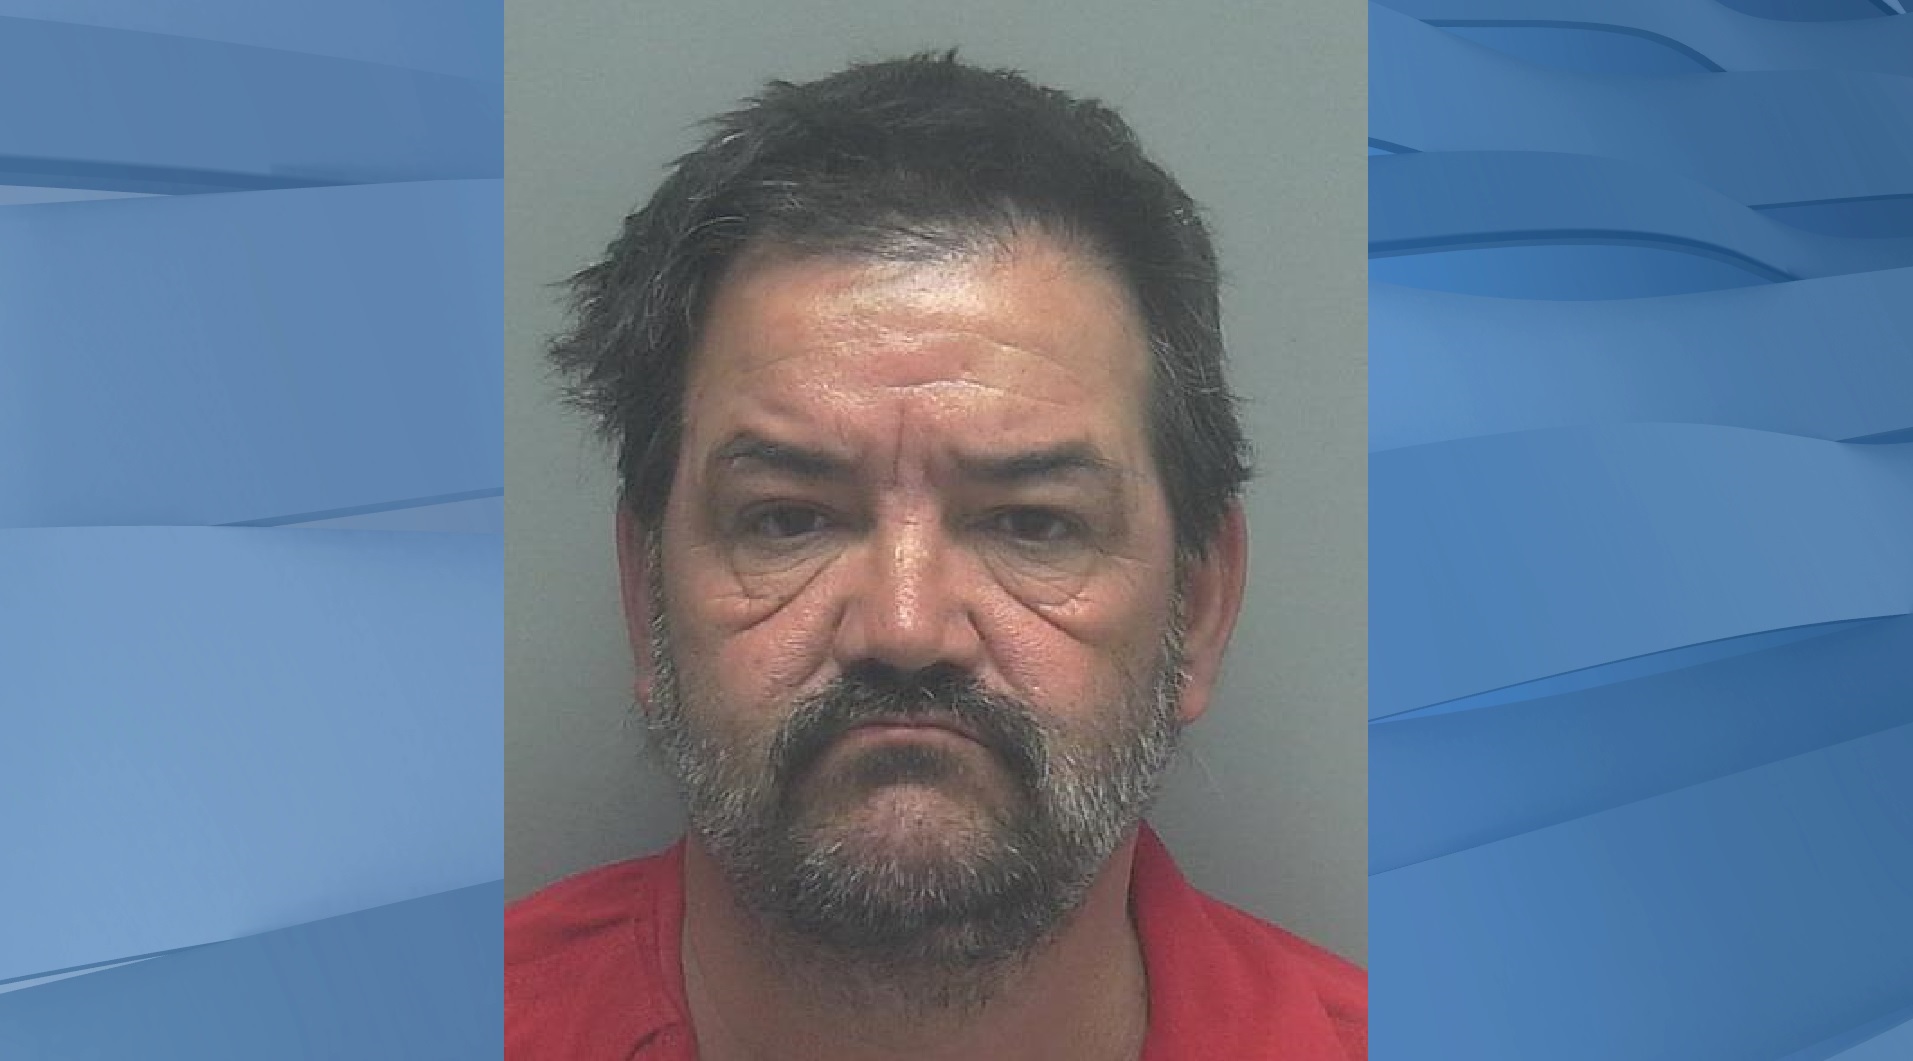 Man accused of 1998 Lee County murder appears in court - WINK News